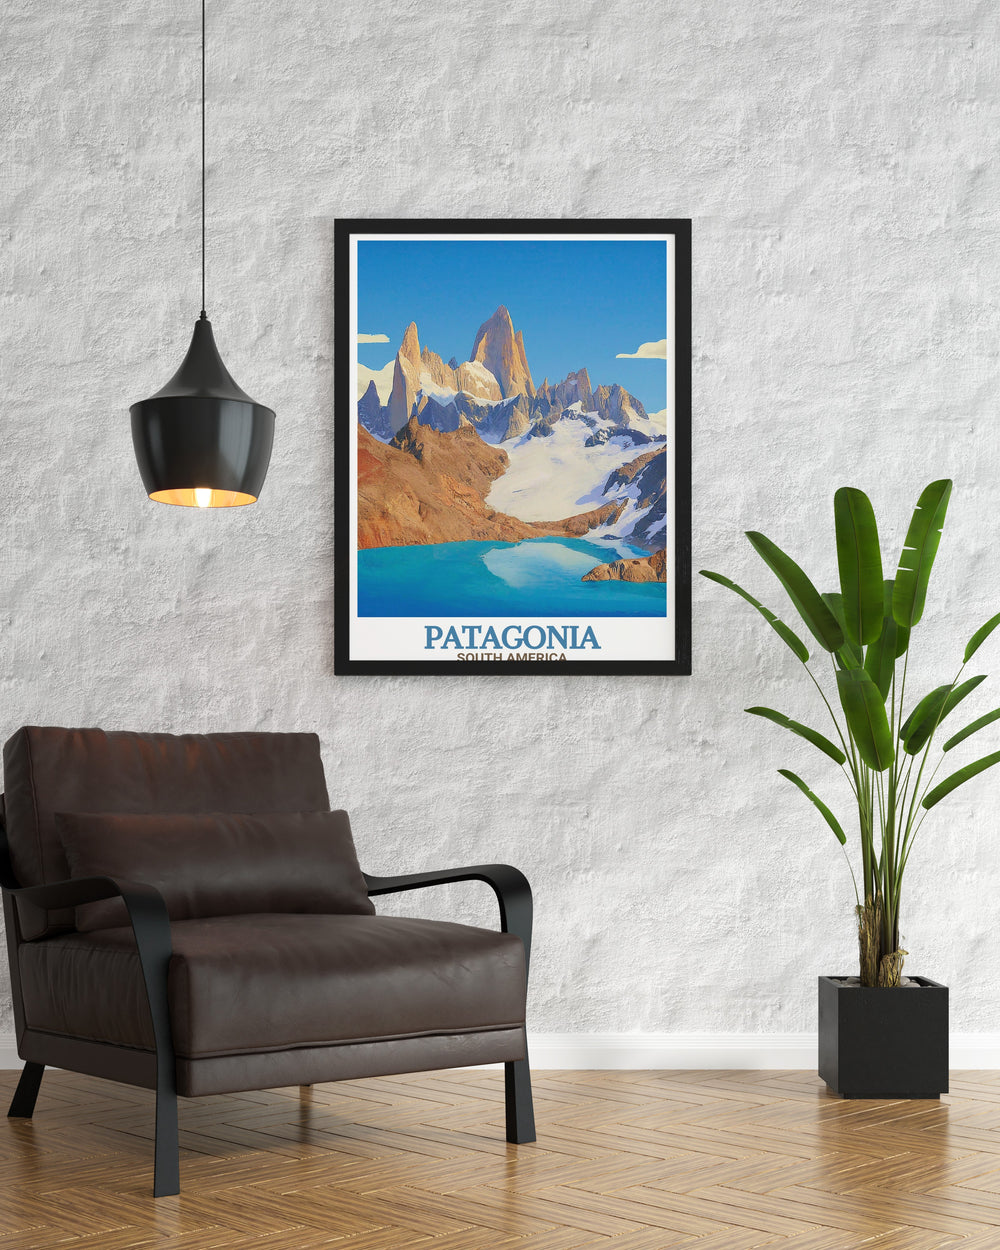 Vibrant Chile travel poster showcasing the beauty of Torres Del Paine and Mount Fitz Roy. Ideal for adding a touch of South America to your wall art collection. Retro travel poster style for vintage and modern art lovers alike.